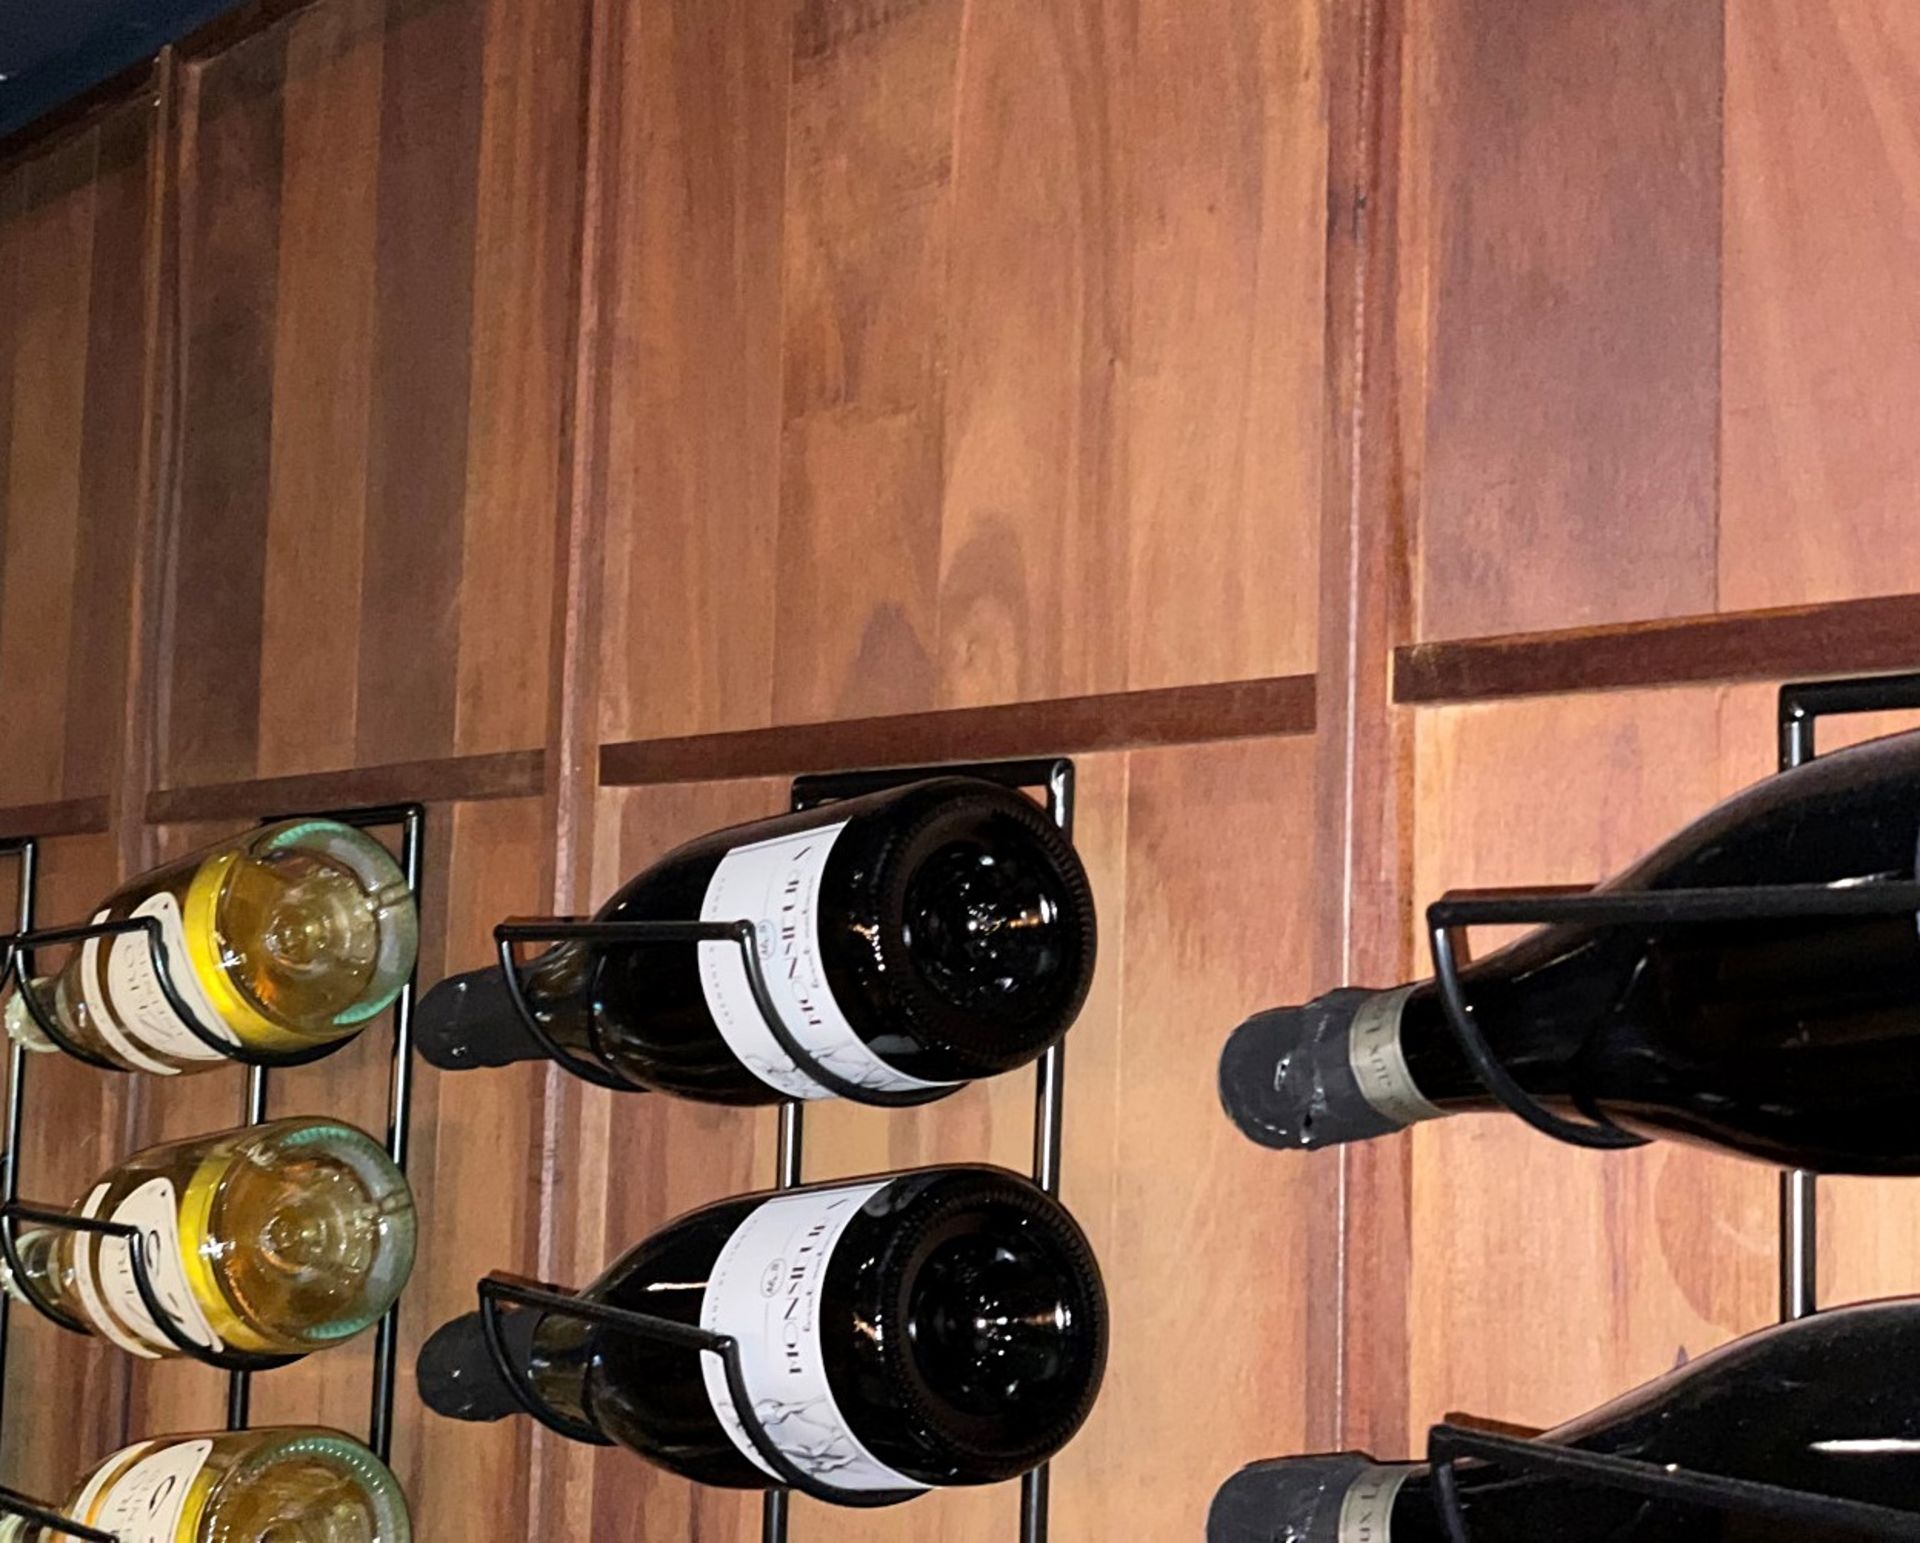 6 x Wooden Wall Panels With Wine Racks Boasting A Combined Capacity Of 60 x Bottles - Image 6 of 7